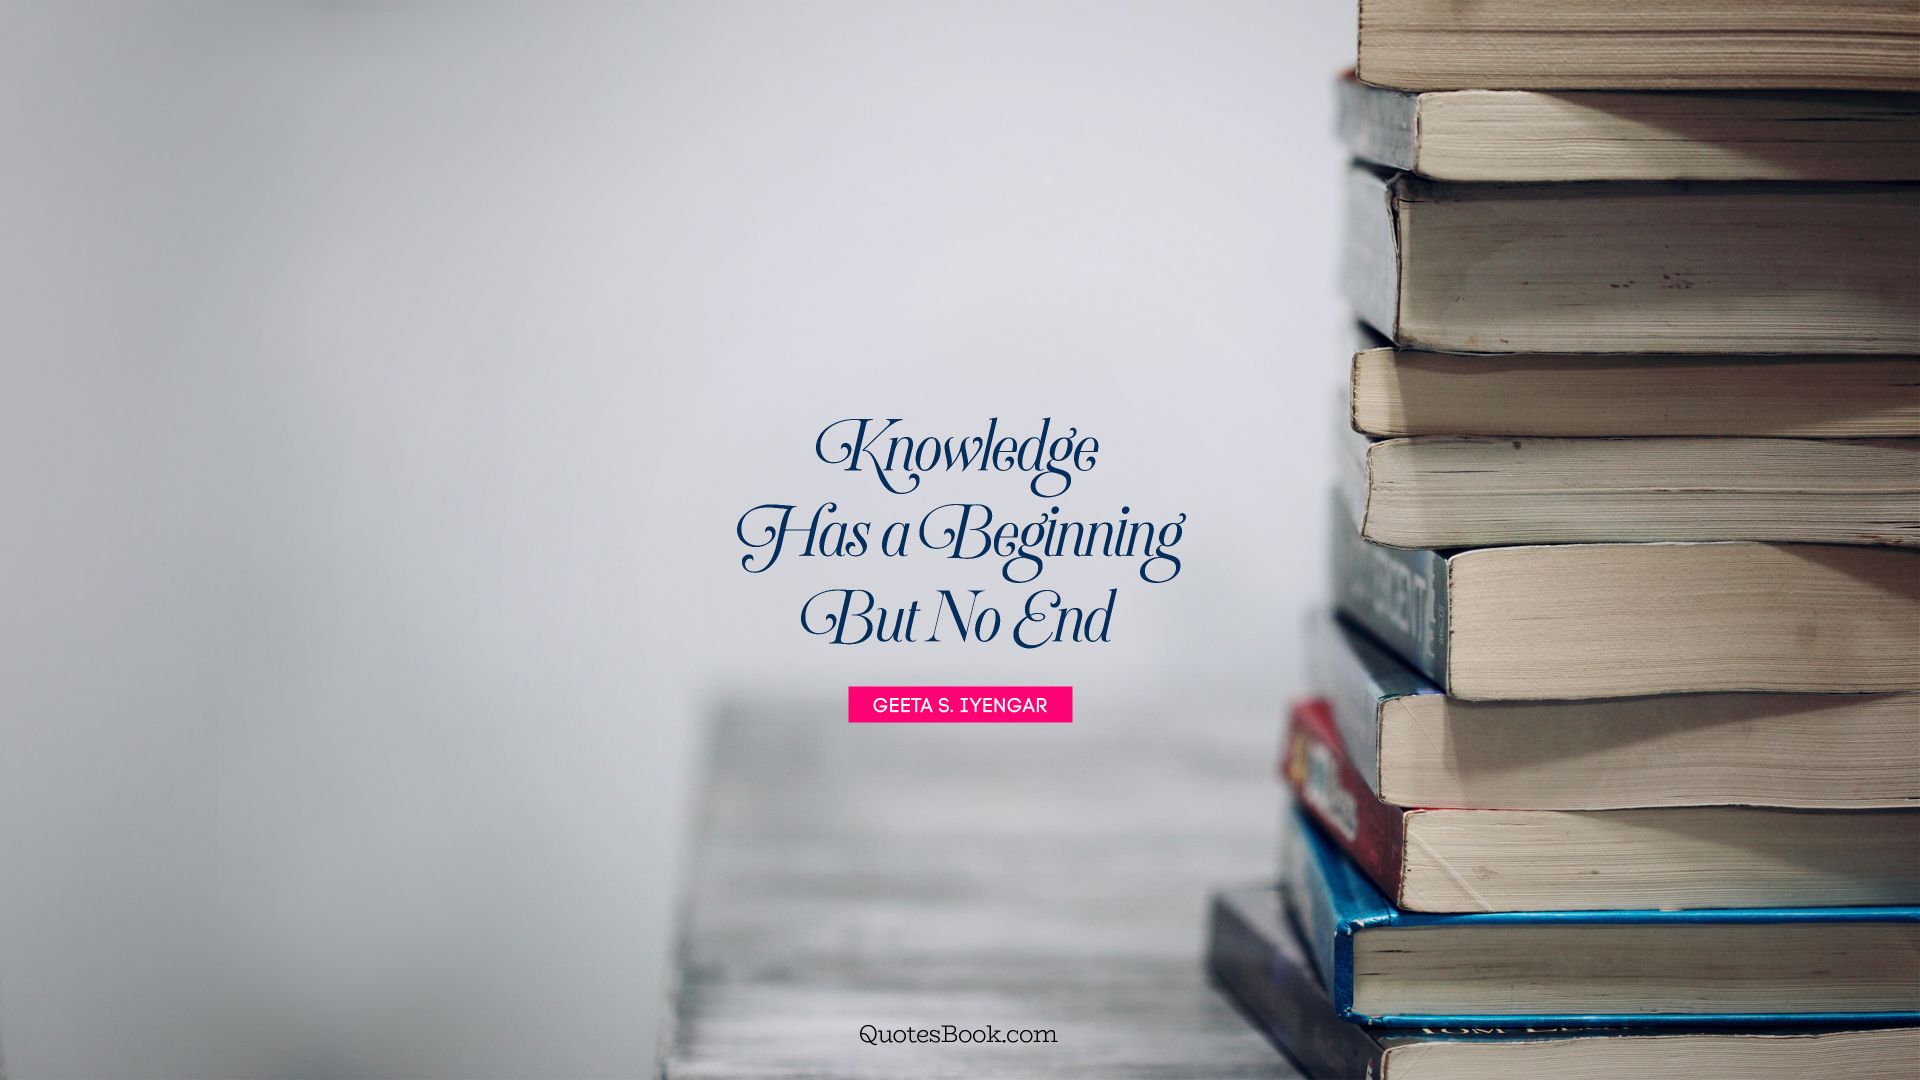 Knowledge has a beginning but no end. - Quote by Geeta S. Iyengar